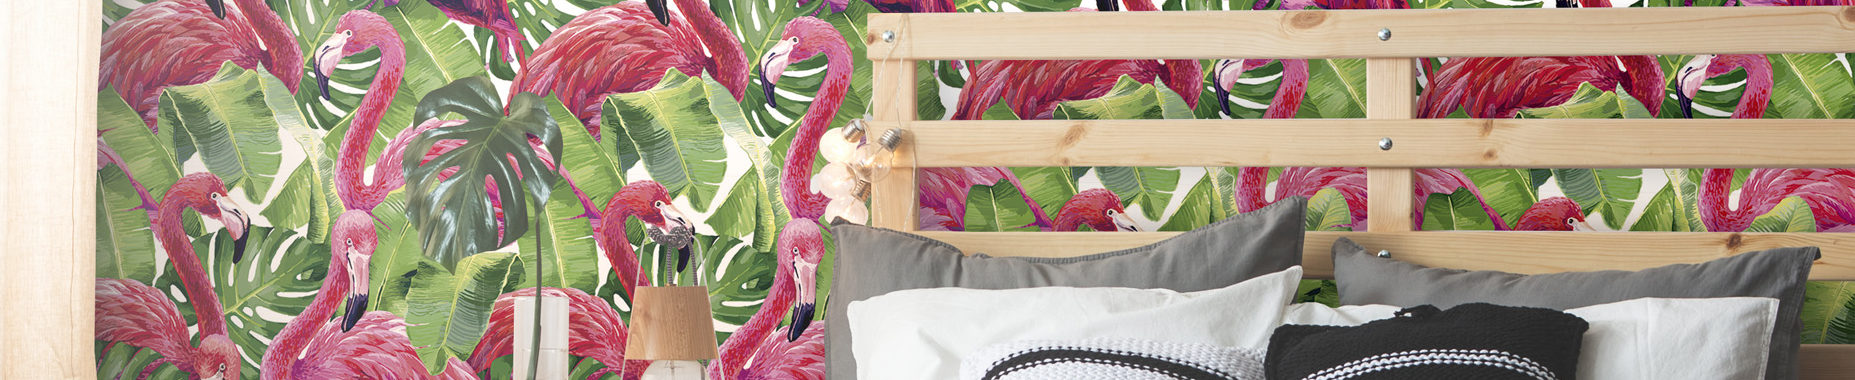 wooden bed with green leaves and pink flamingos wallpaper background